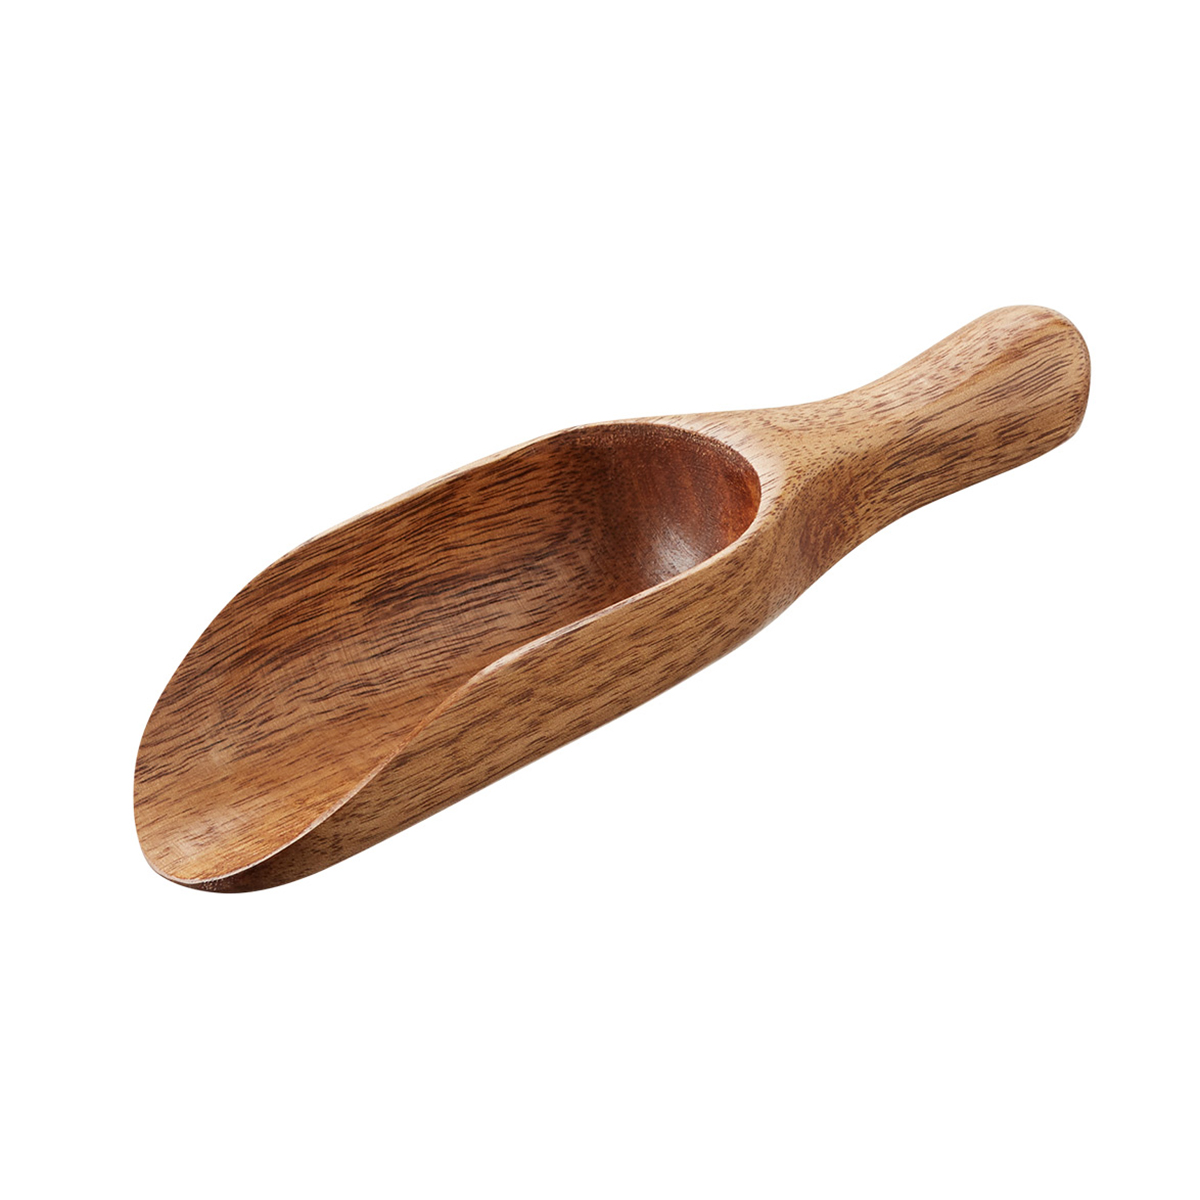 The Container Store Wooden Scoops